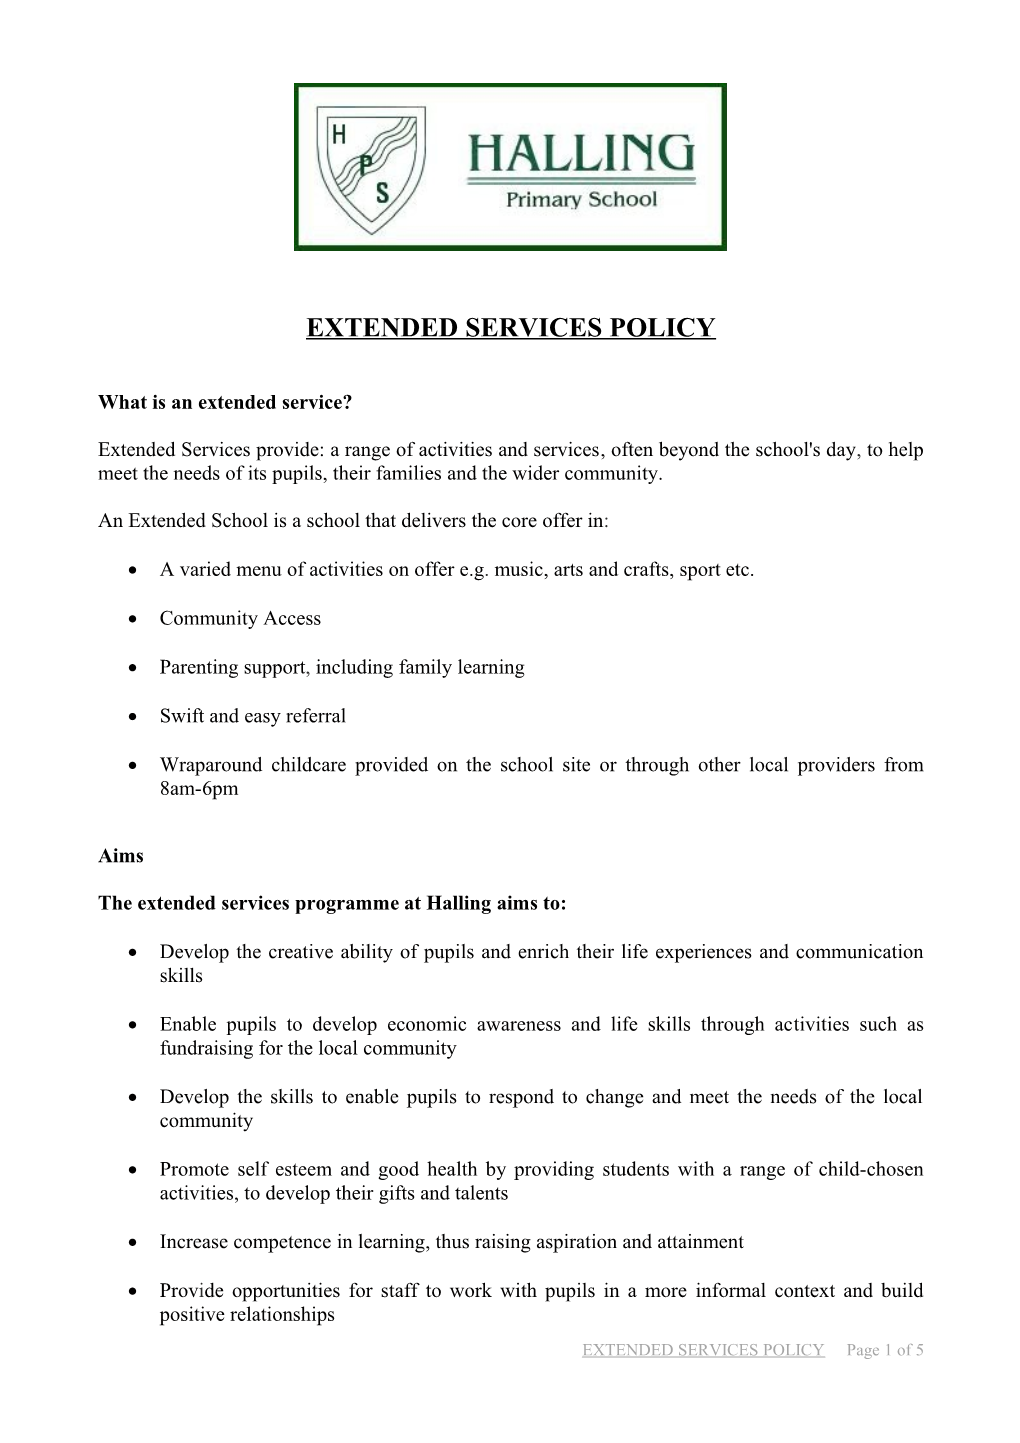 Extended Services Policy